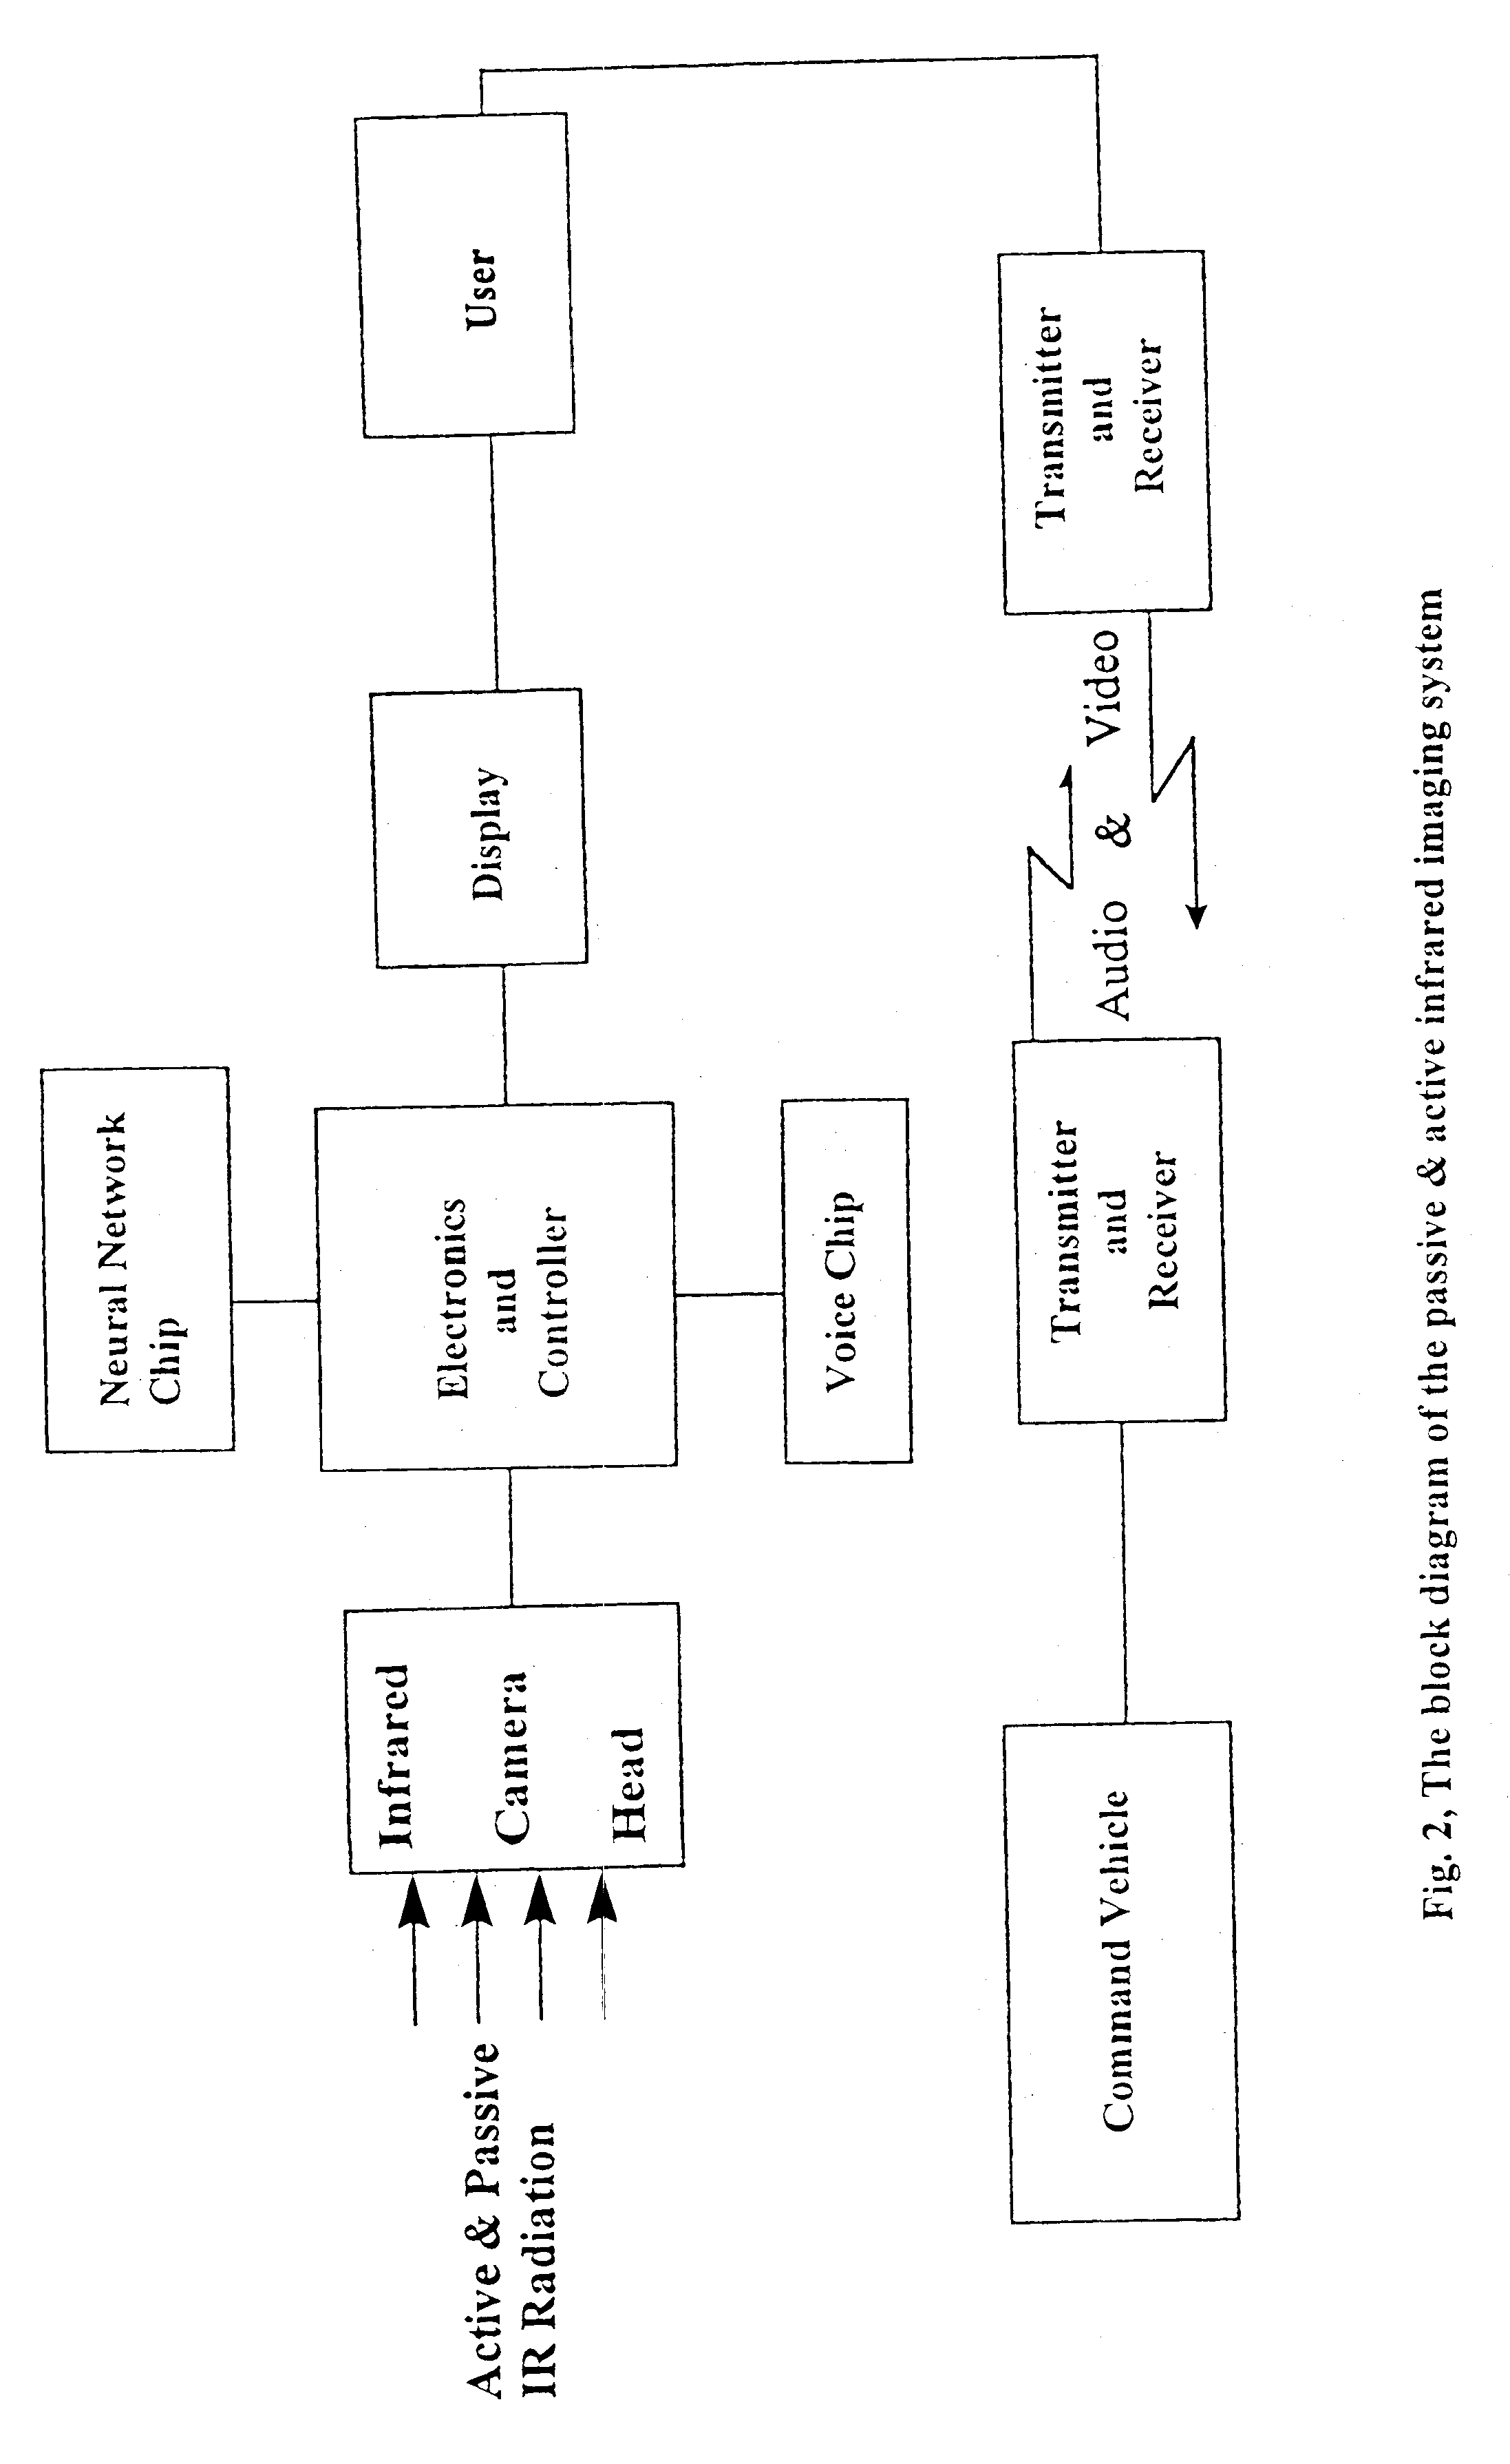 Head/helmet mounted passive and active infrared imaging system with/without parallax